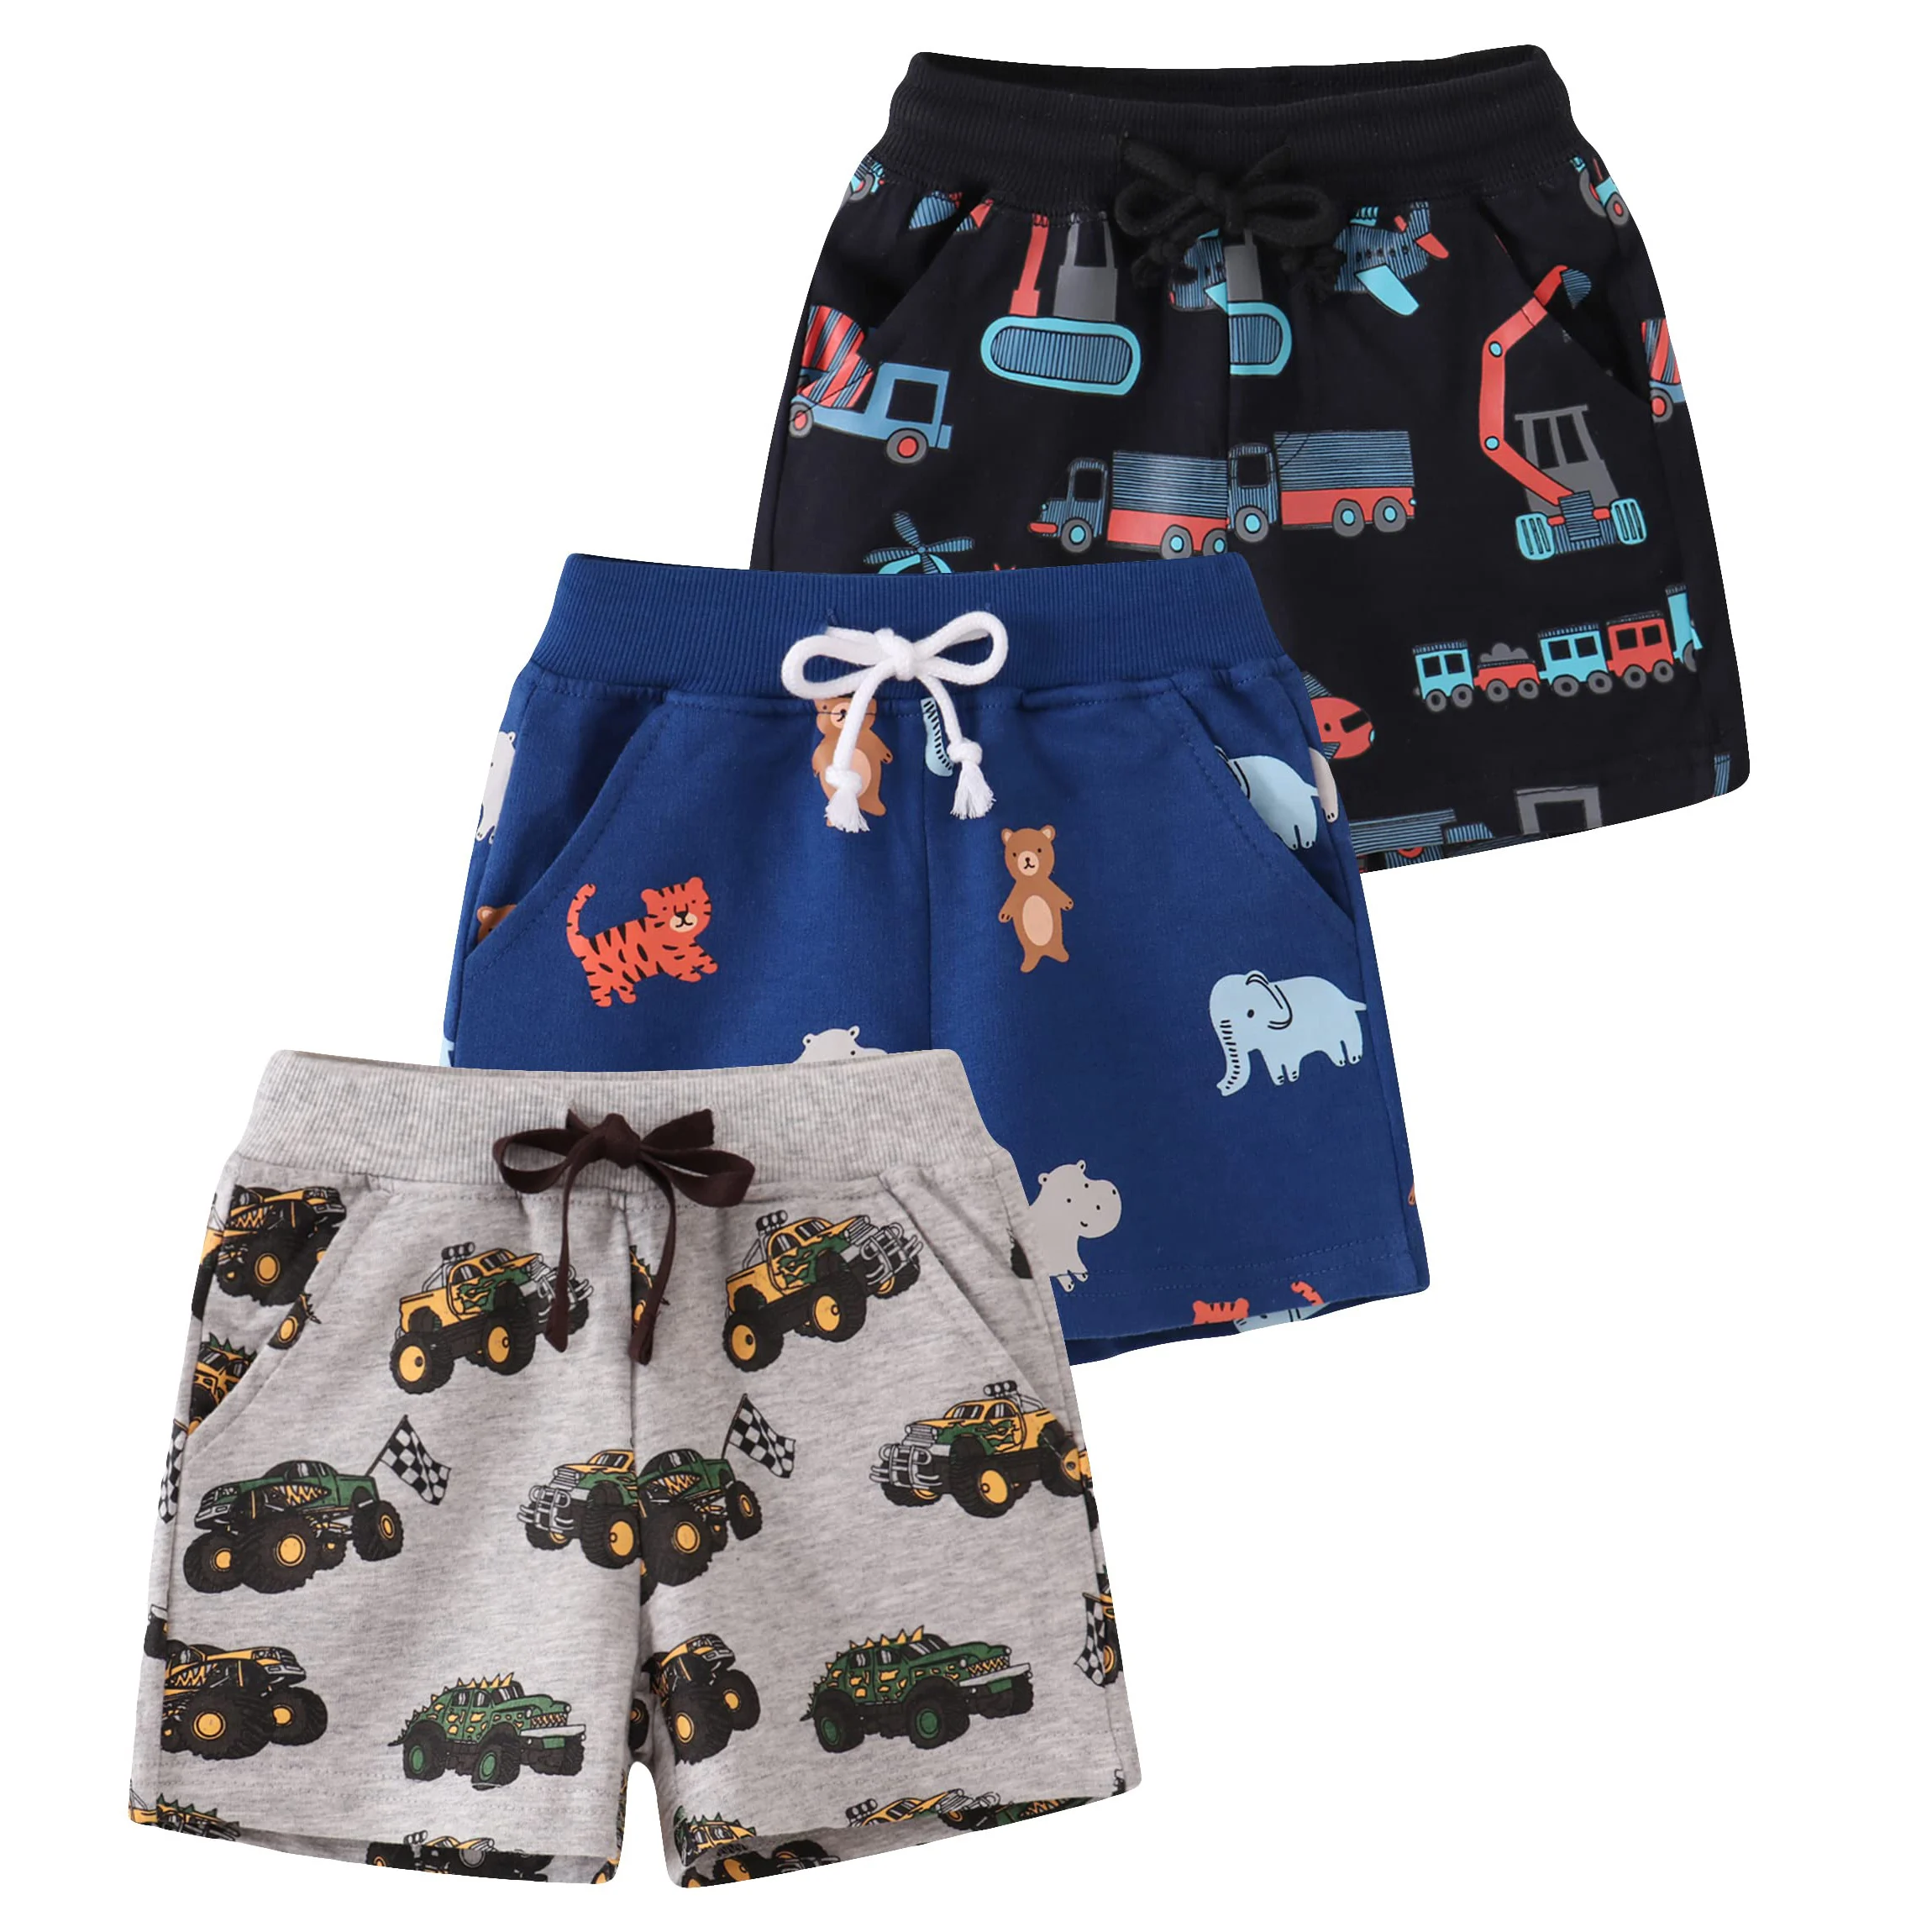 Toddler Boys Summer Cotton Shorts With Pocket,Baby Pull-on Casual ...